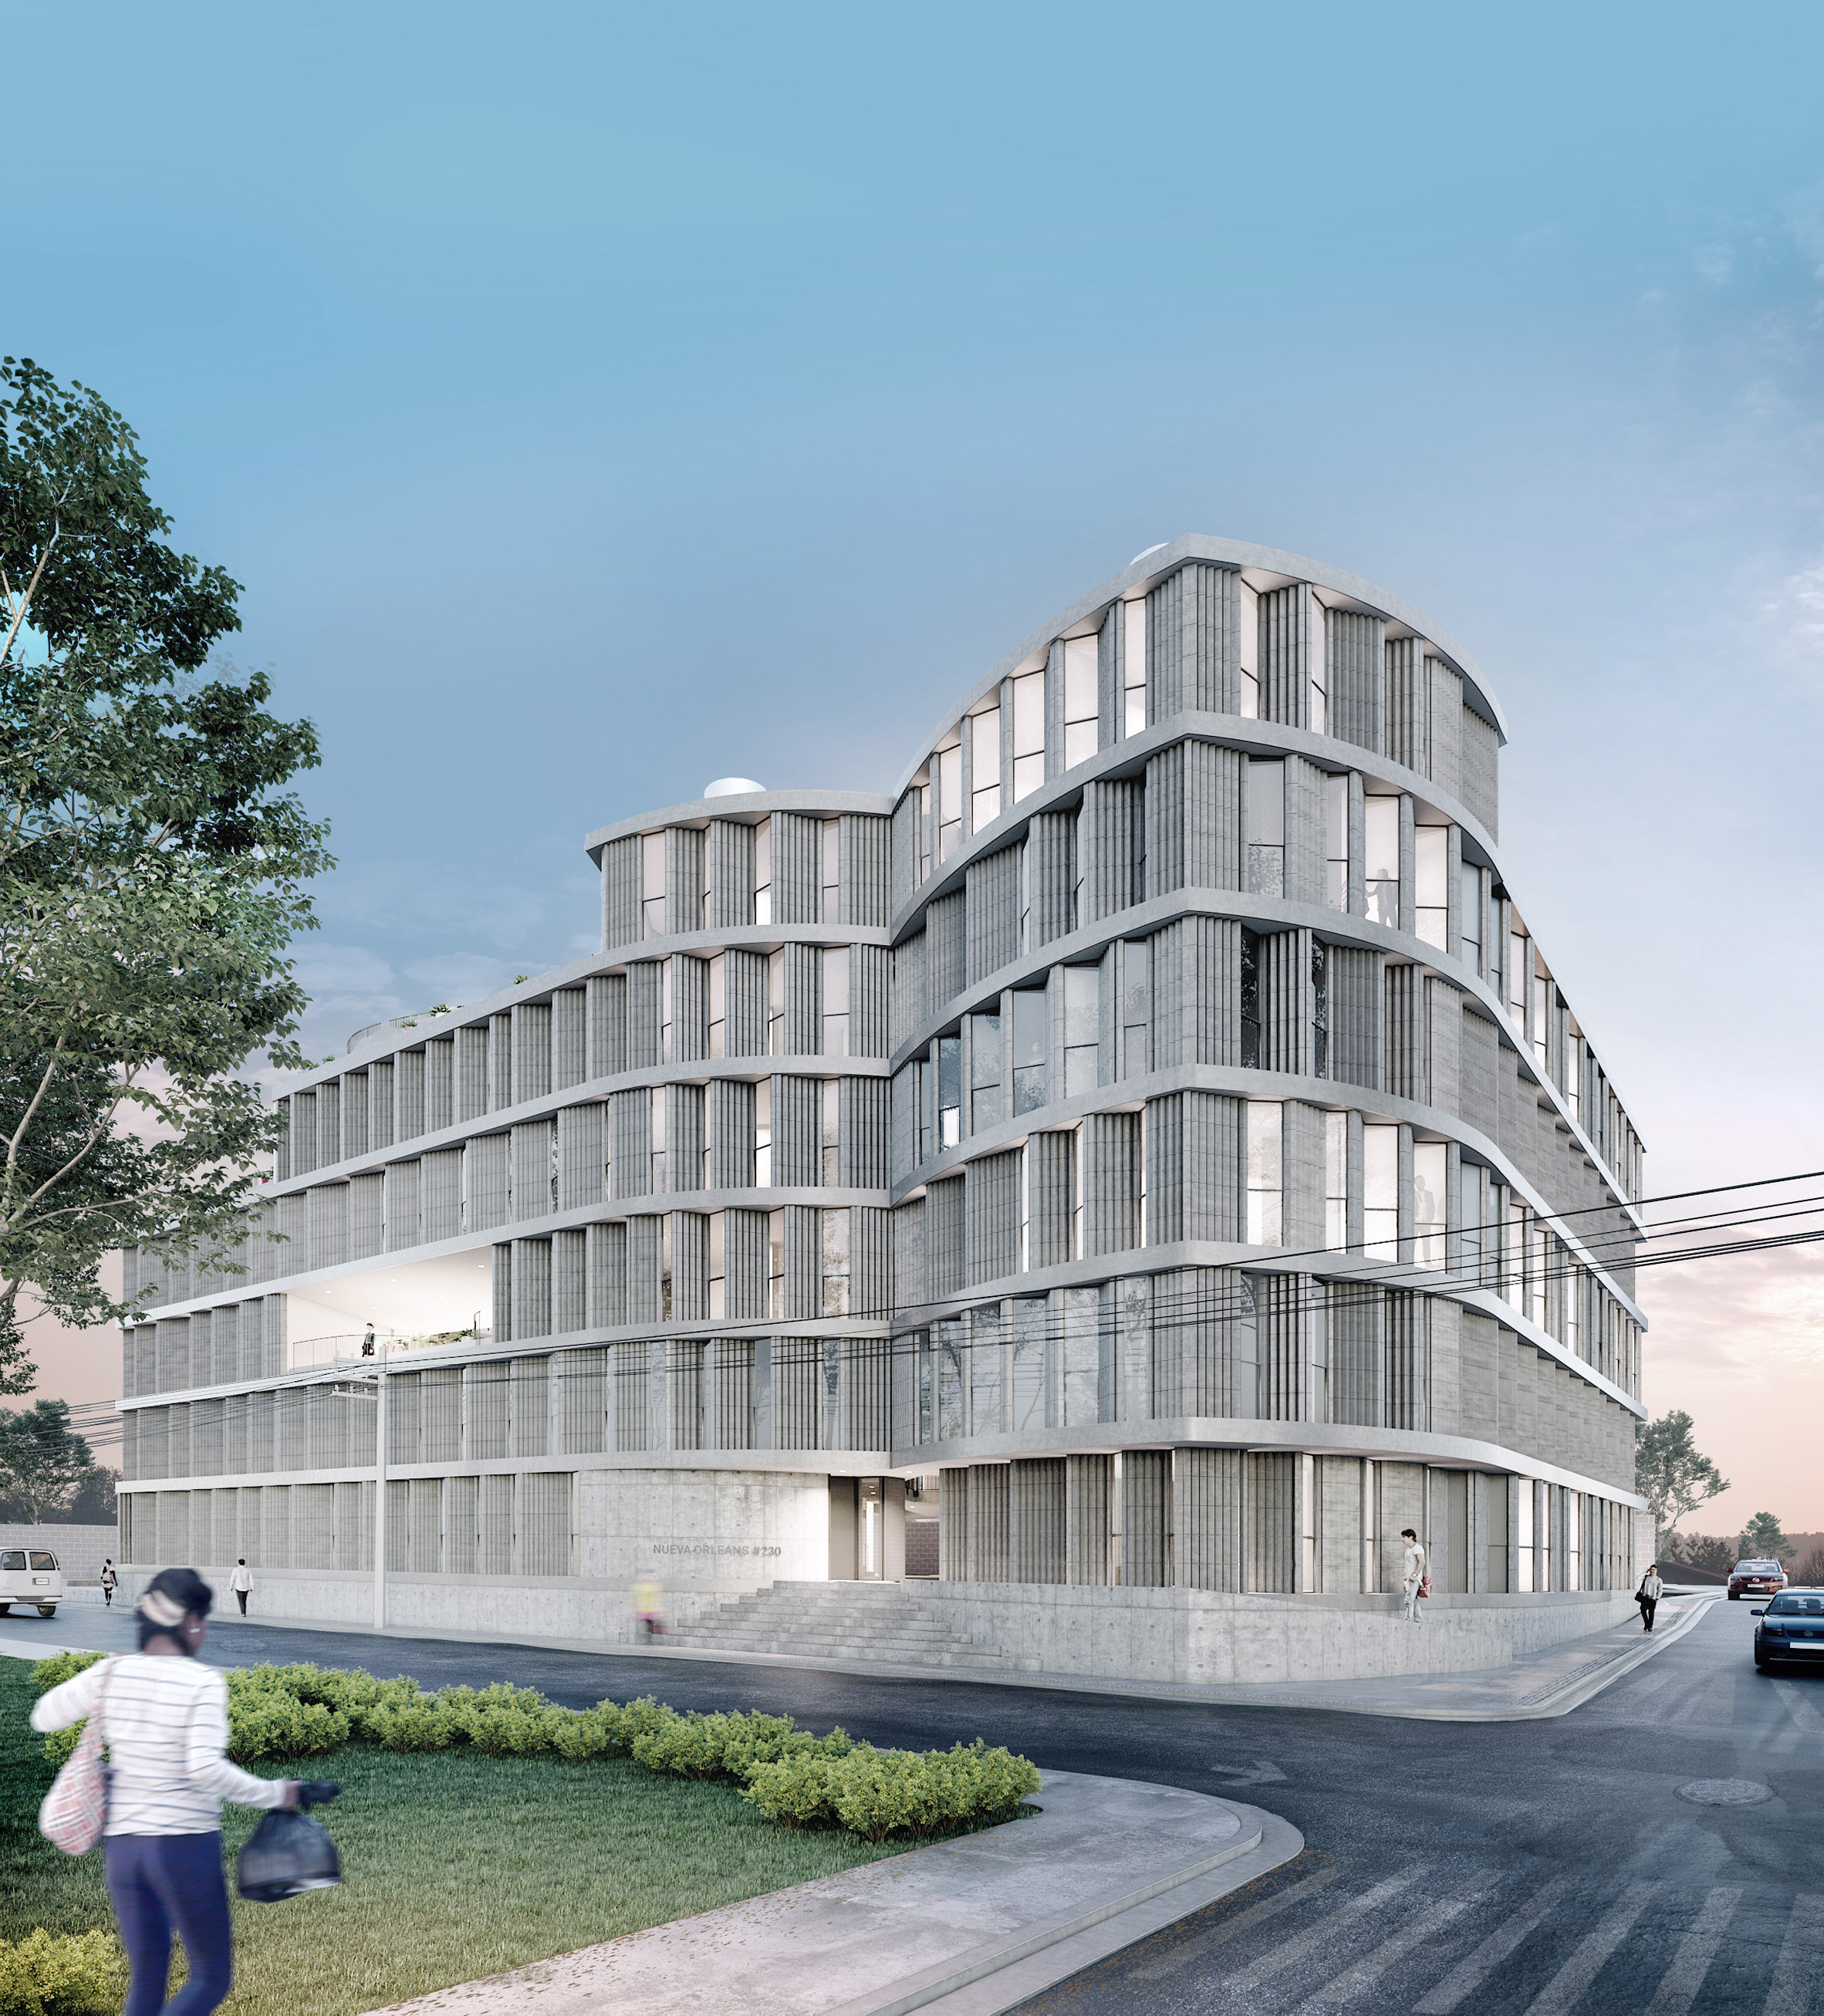 Las Americas affordable housing by SO-IL